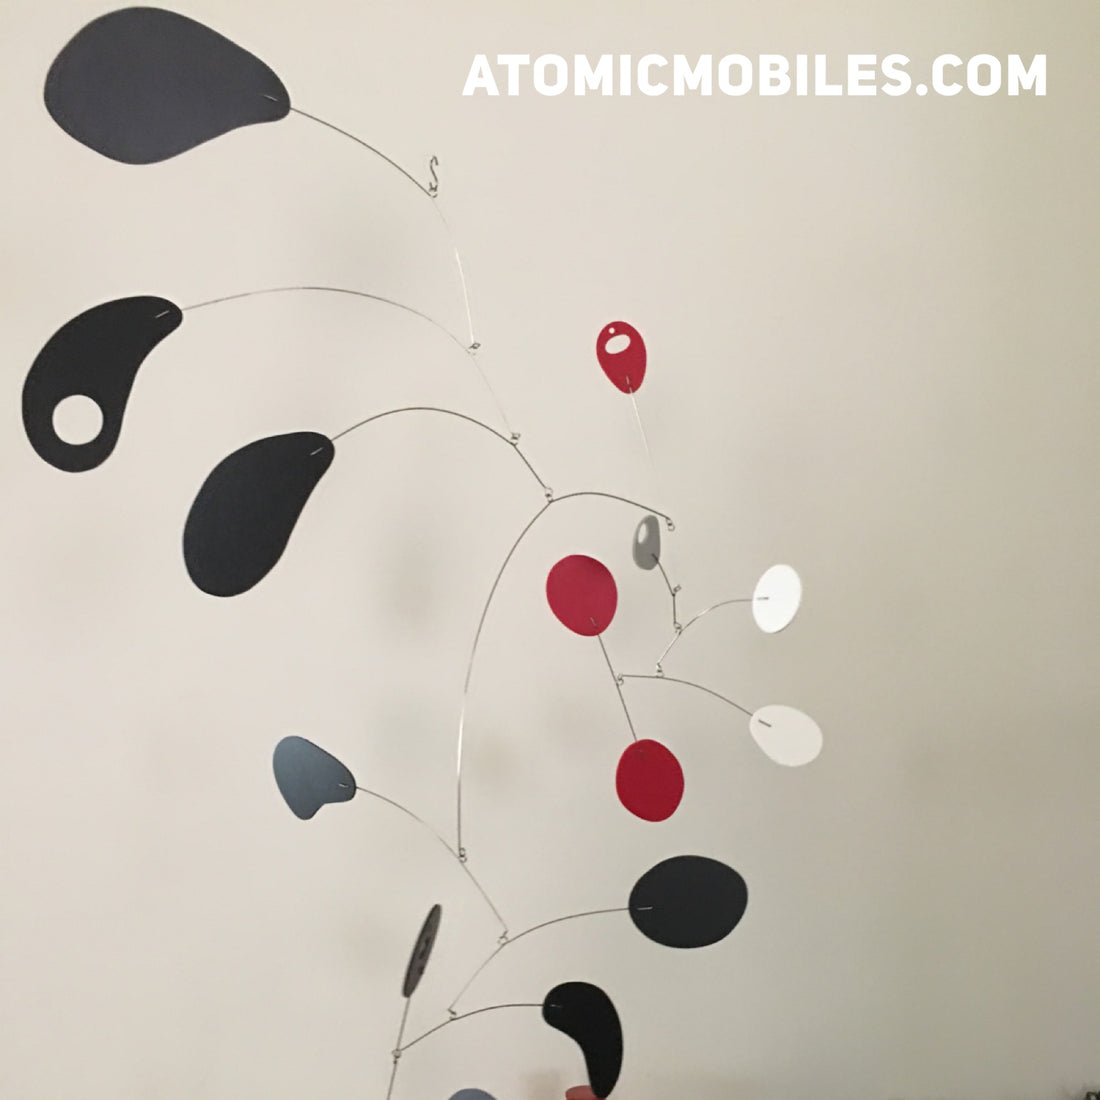 CoolCat MidCentury Decor - modern hanging mobiles by AtomicMobiles.com